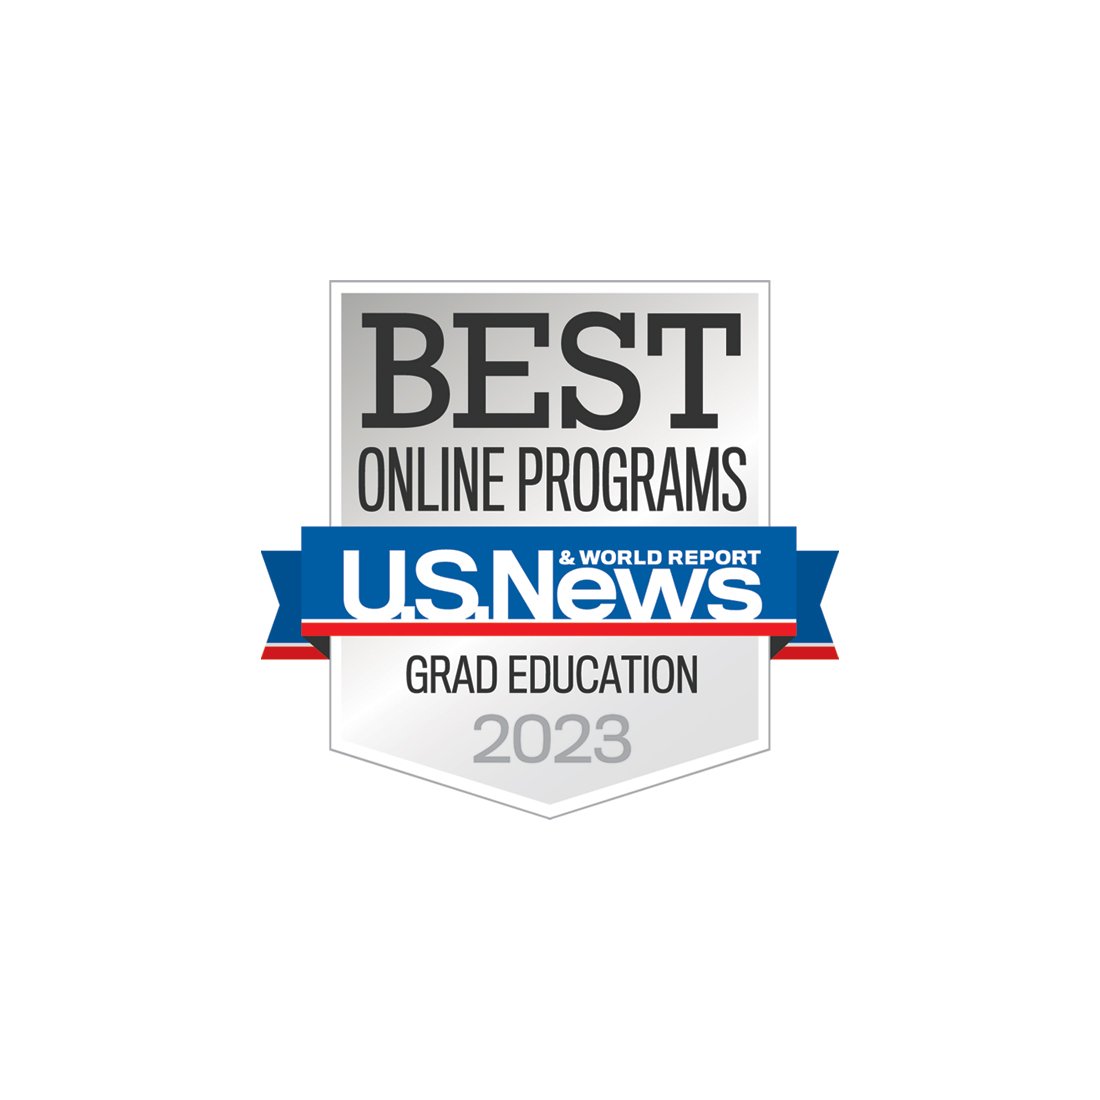 A U.S. News & World Report badge to represent Rowan University's ranking on the “Best Online Master's Education Programs” list by U.S. News & World Report.